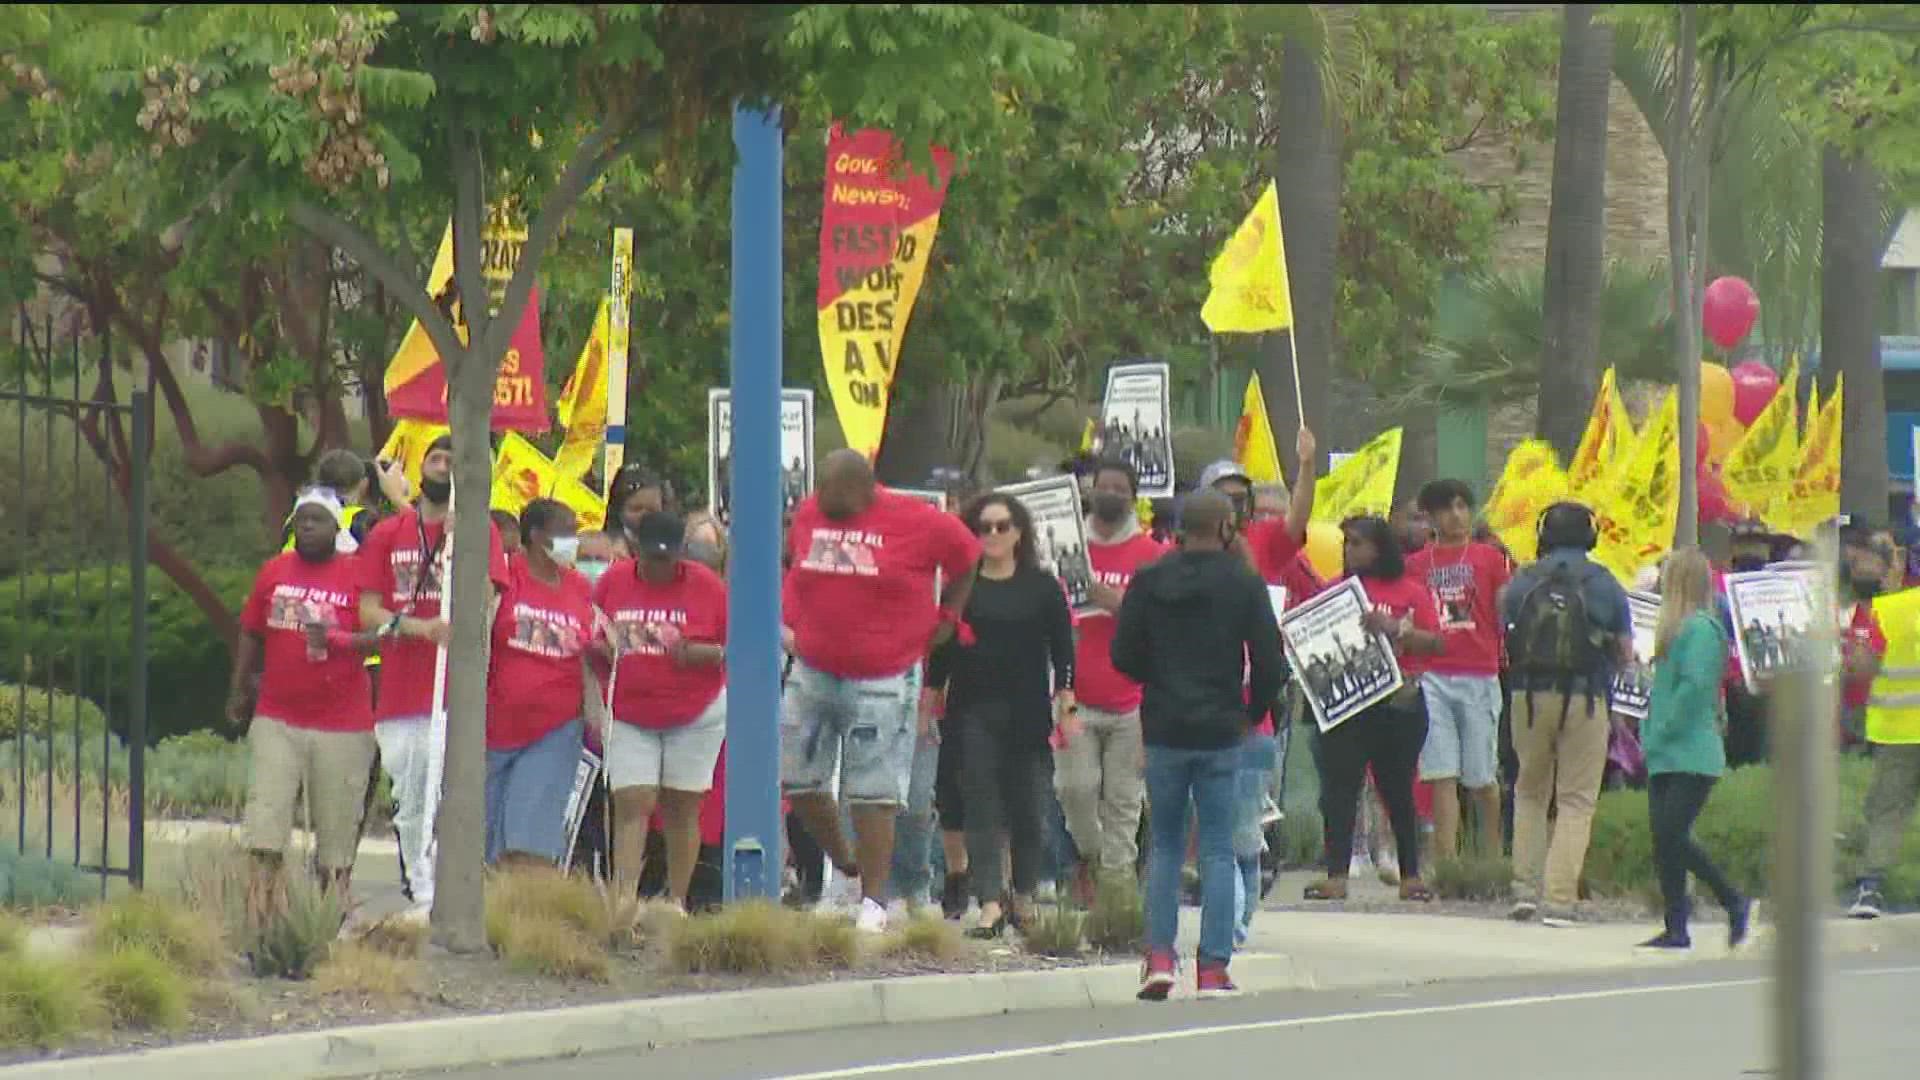 Fast-food workers gathered to demand higher wagers and safer work conditions.